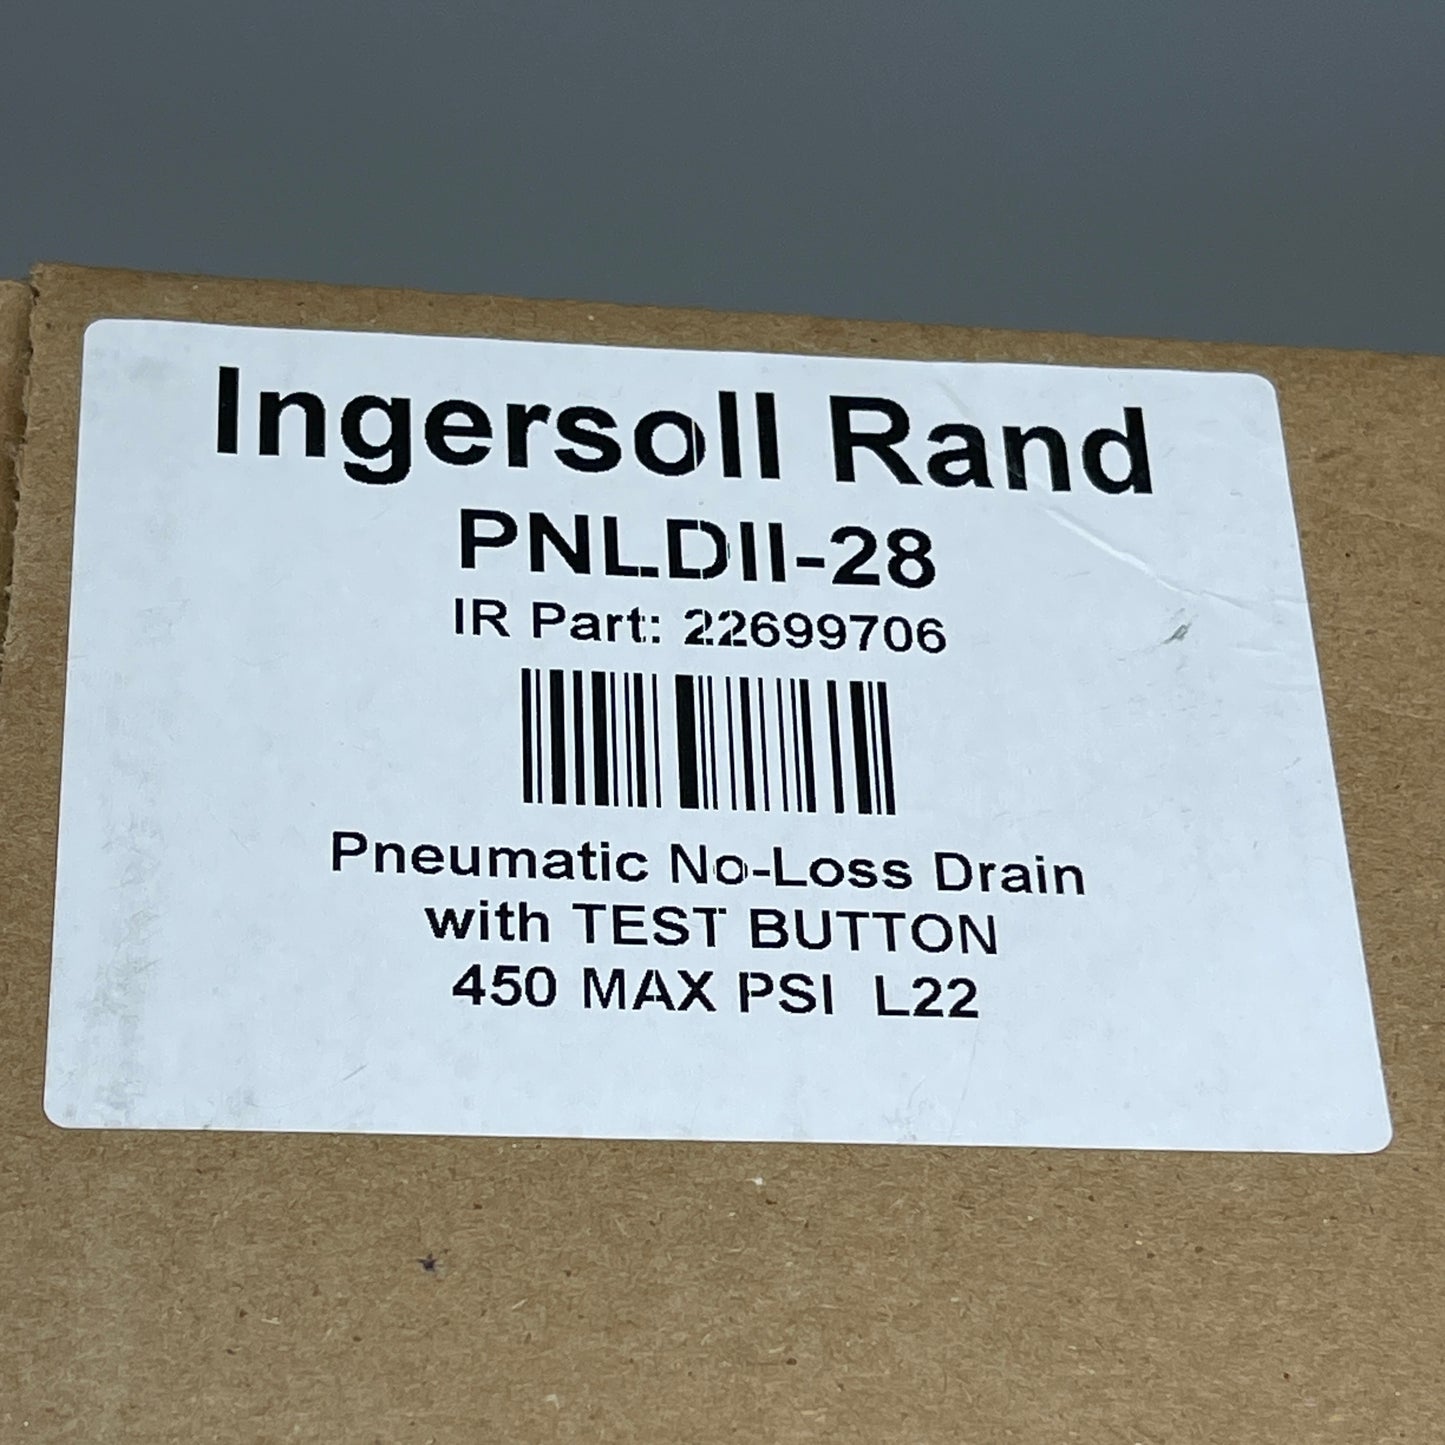 Automatic PNLD II-28 Pneumatic No-Loss Drain with test button  MPN: 22699706 